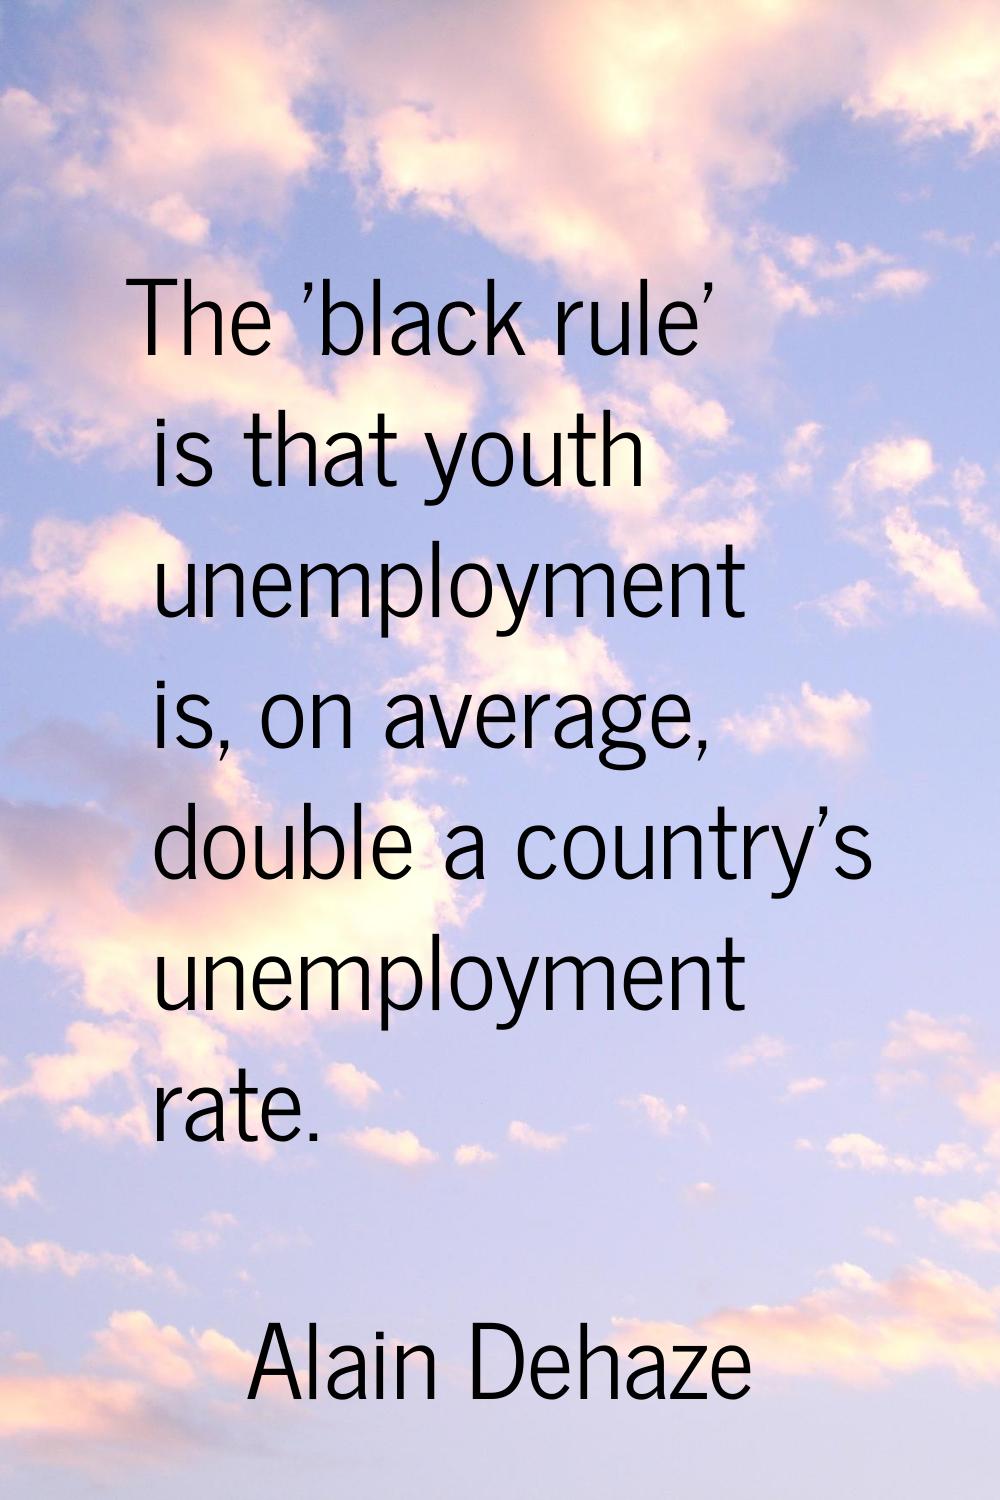 The 'black rule' is that youth unemployment is, on average, double a country's unemployment rate.